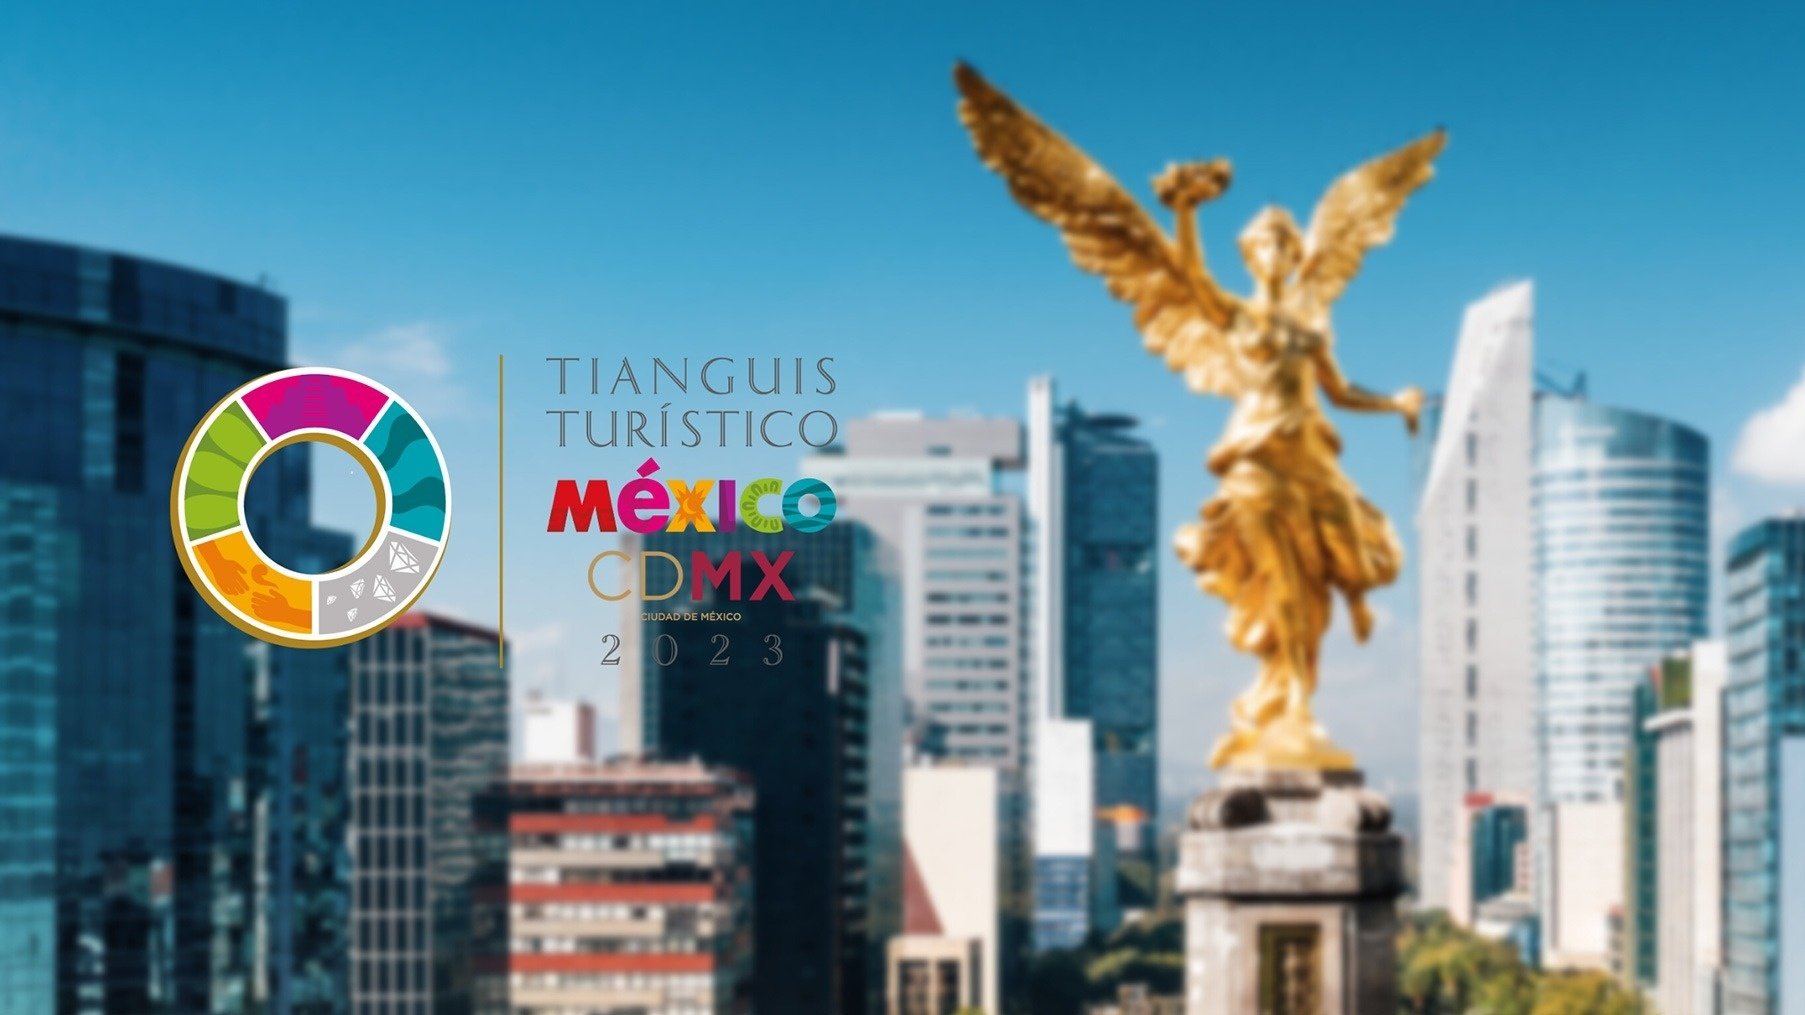 Paraty Tech will attend the Tianguis Turístico in Mexico City.